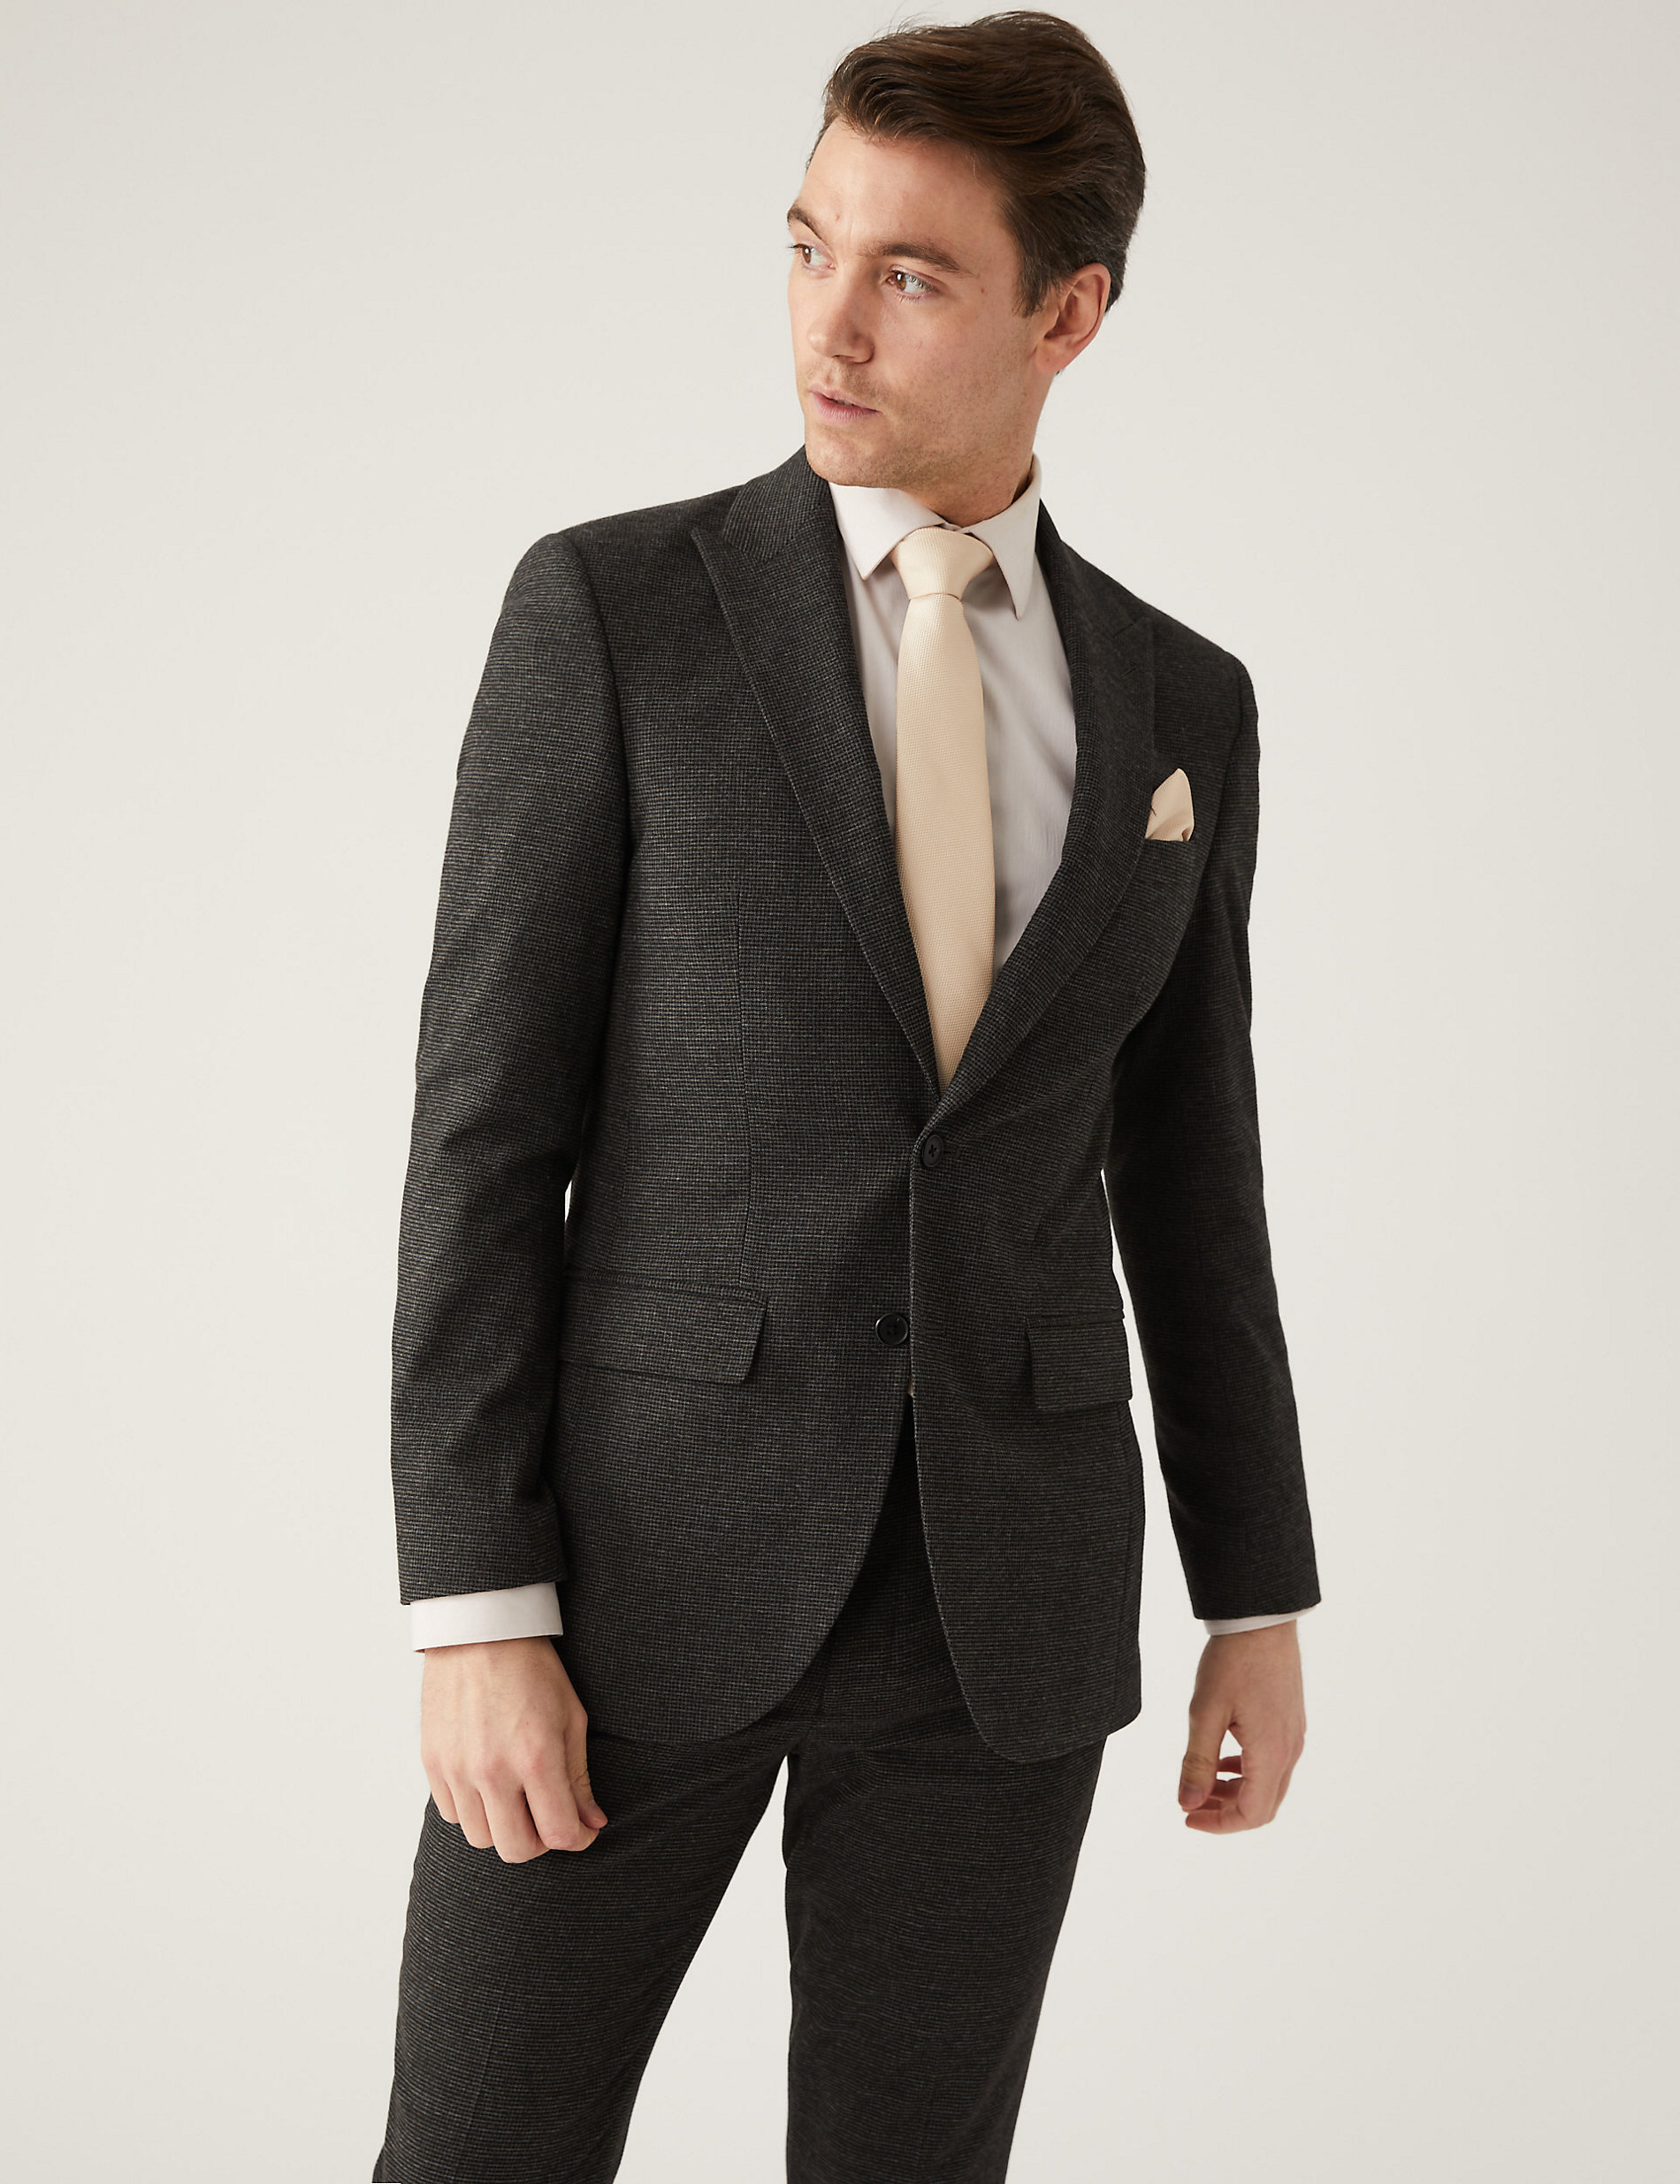 Slim Fit Puppytooth Suit